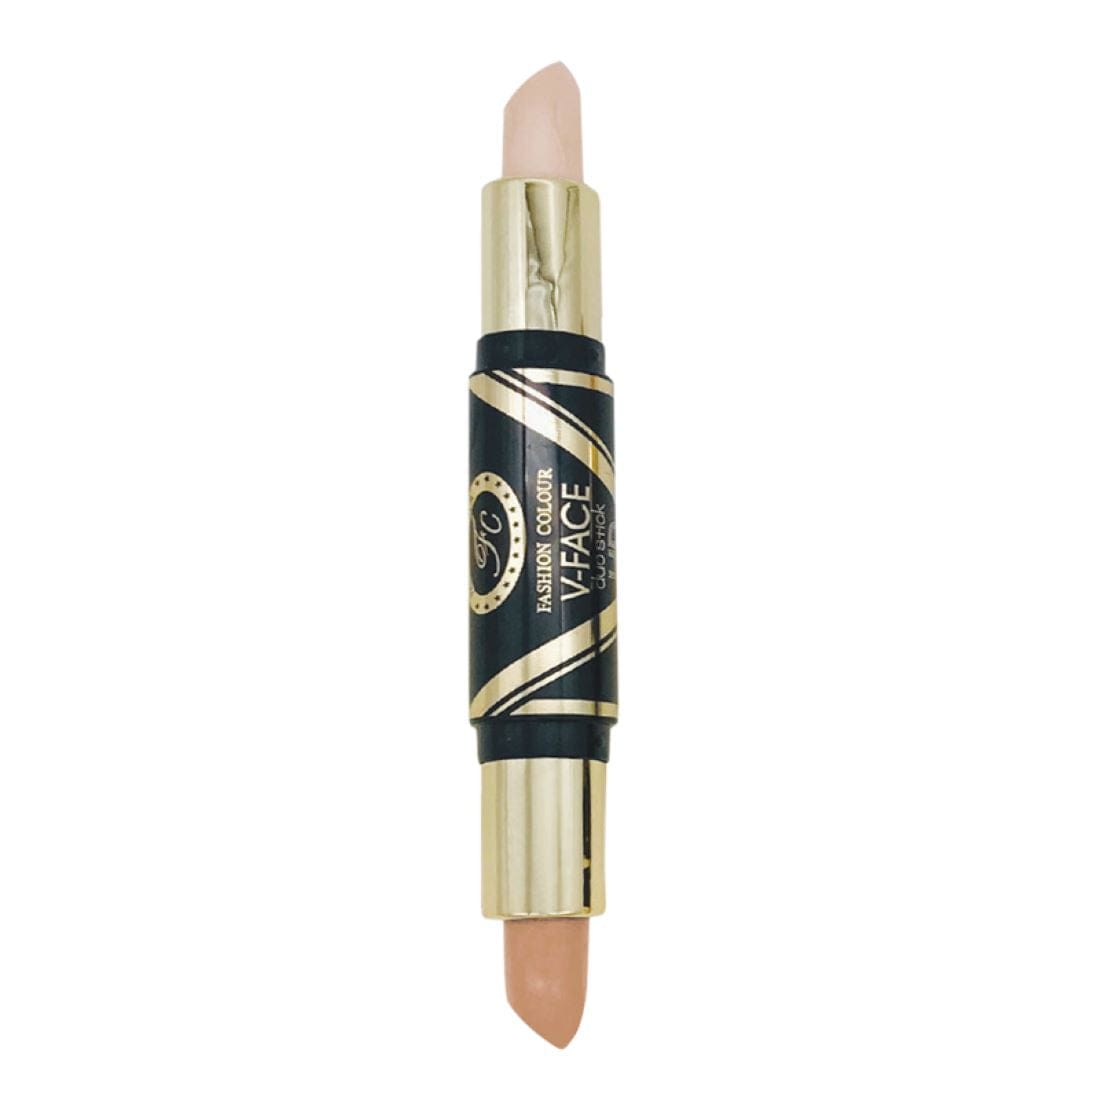 An invaluable two-in-one contouring crayon, You can gently dab the darker shade along the hallows of the cheeks and along the jawline while the other end is the concealer The full coverage concealer effortlessly camouflages uneven skin tone, redness, pigmentation marks, blemishes, and dark circles. It blends seamlessly for a flawless and natural finish Benefit: moisturizer, waterproof/water-resistant, concealer, natural.